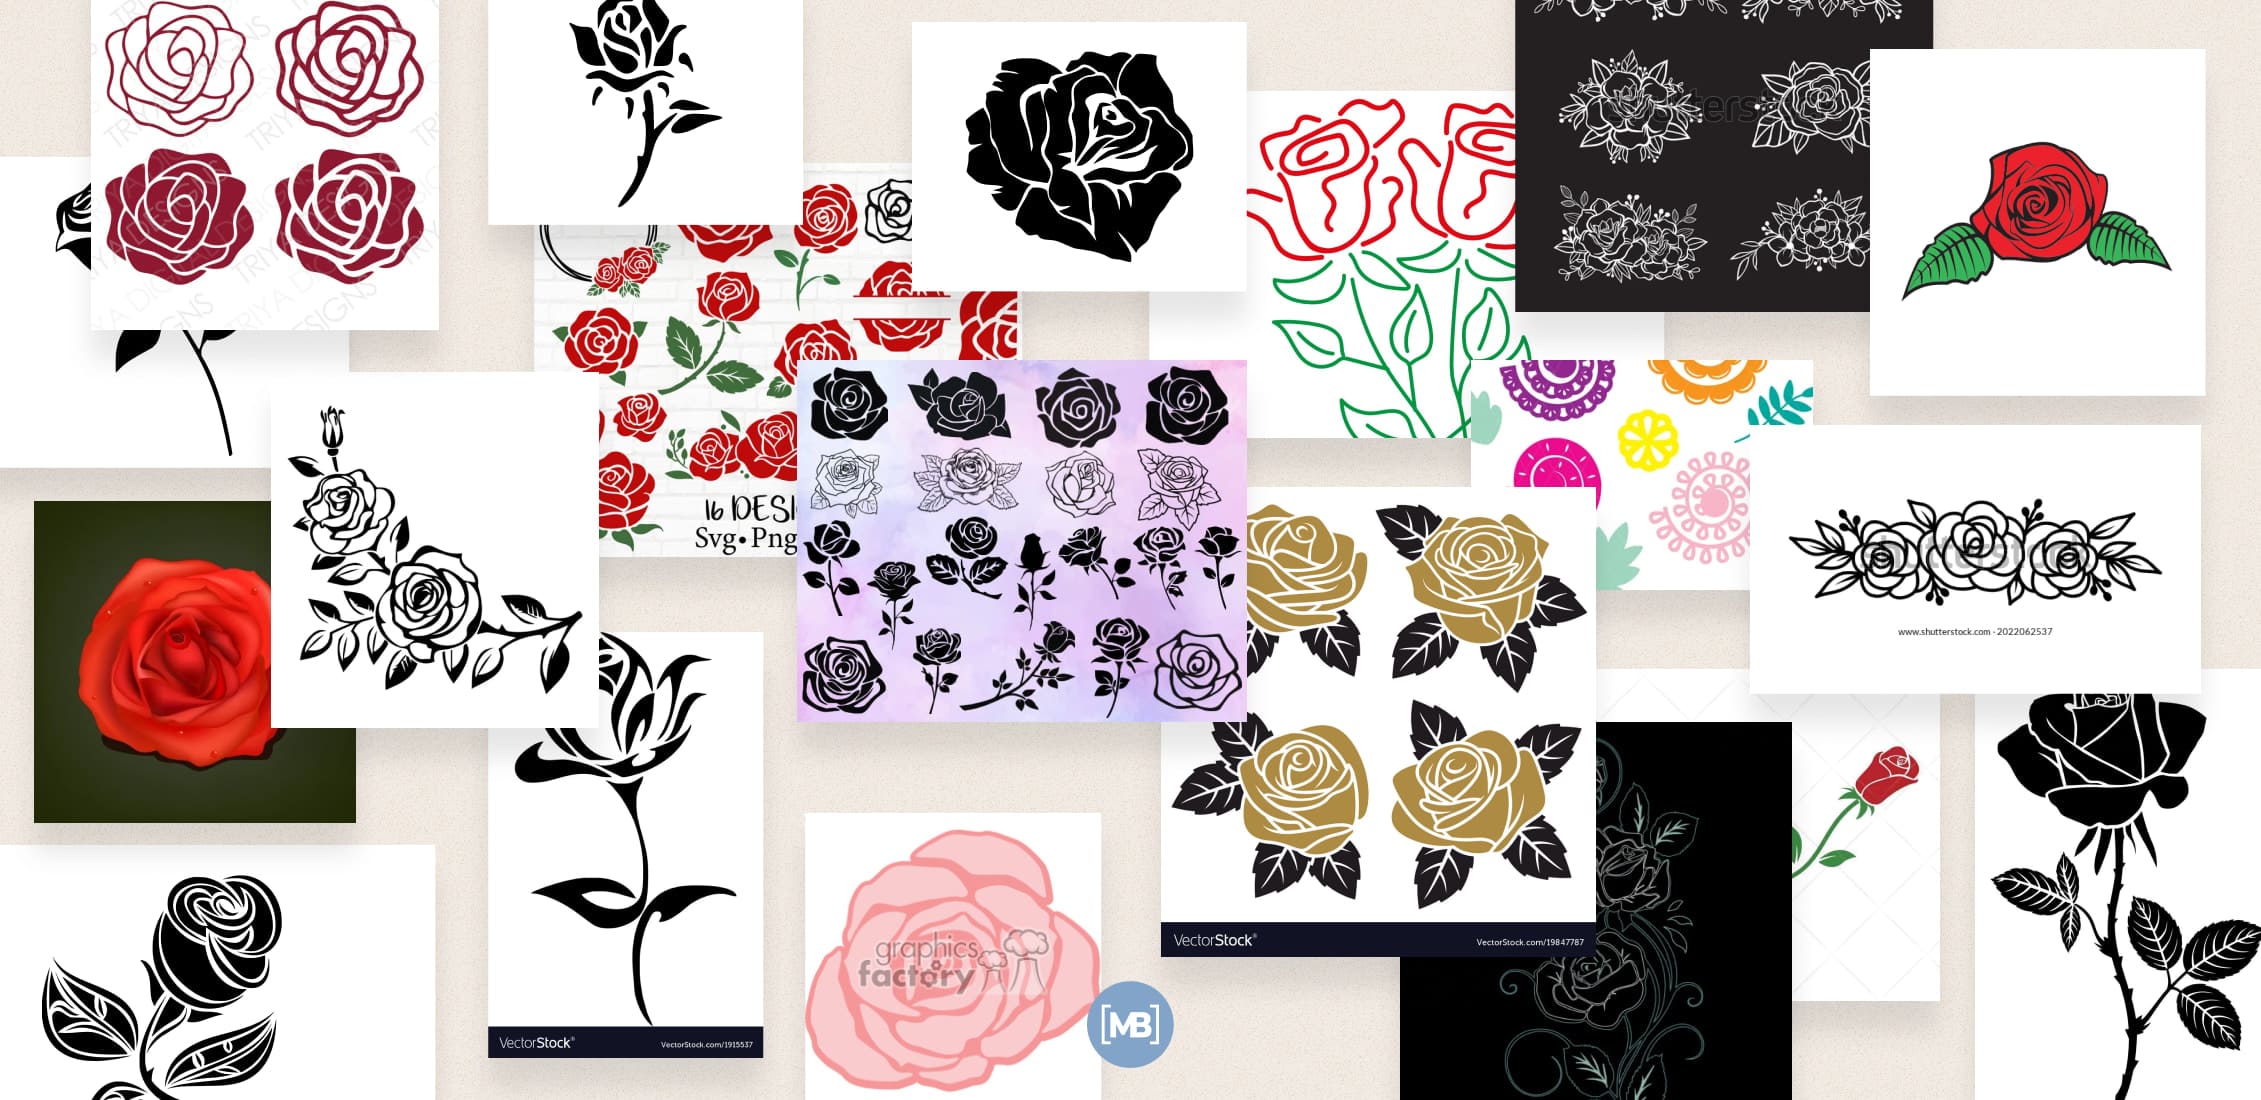 Roses SVG Images Example.